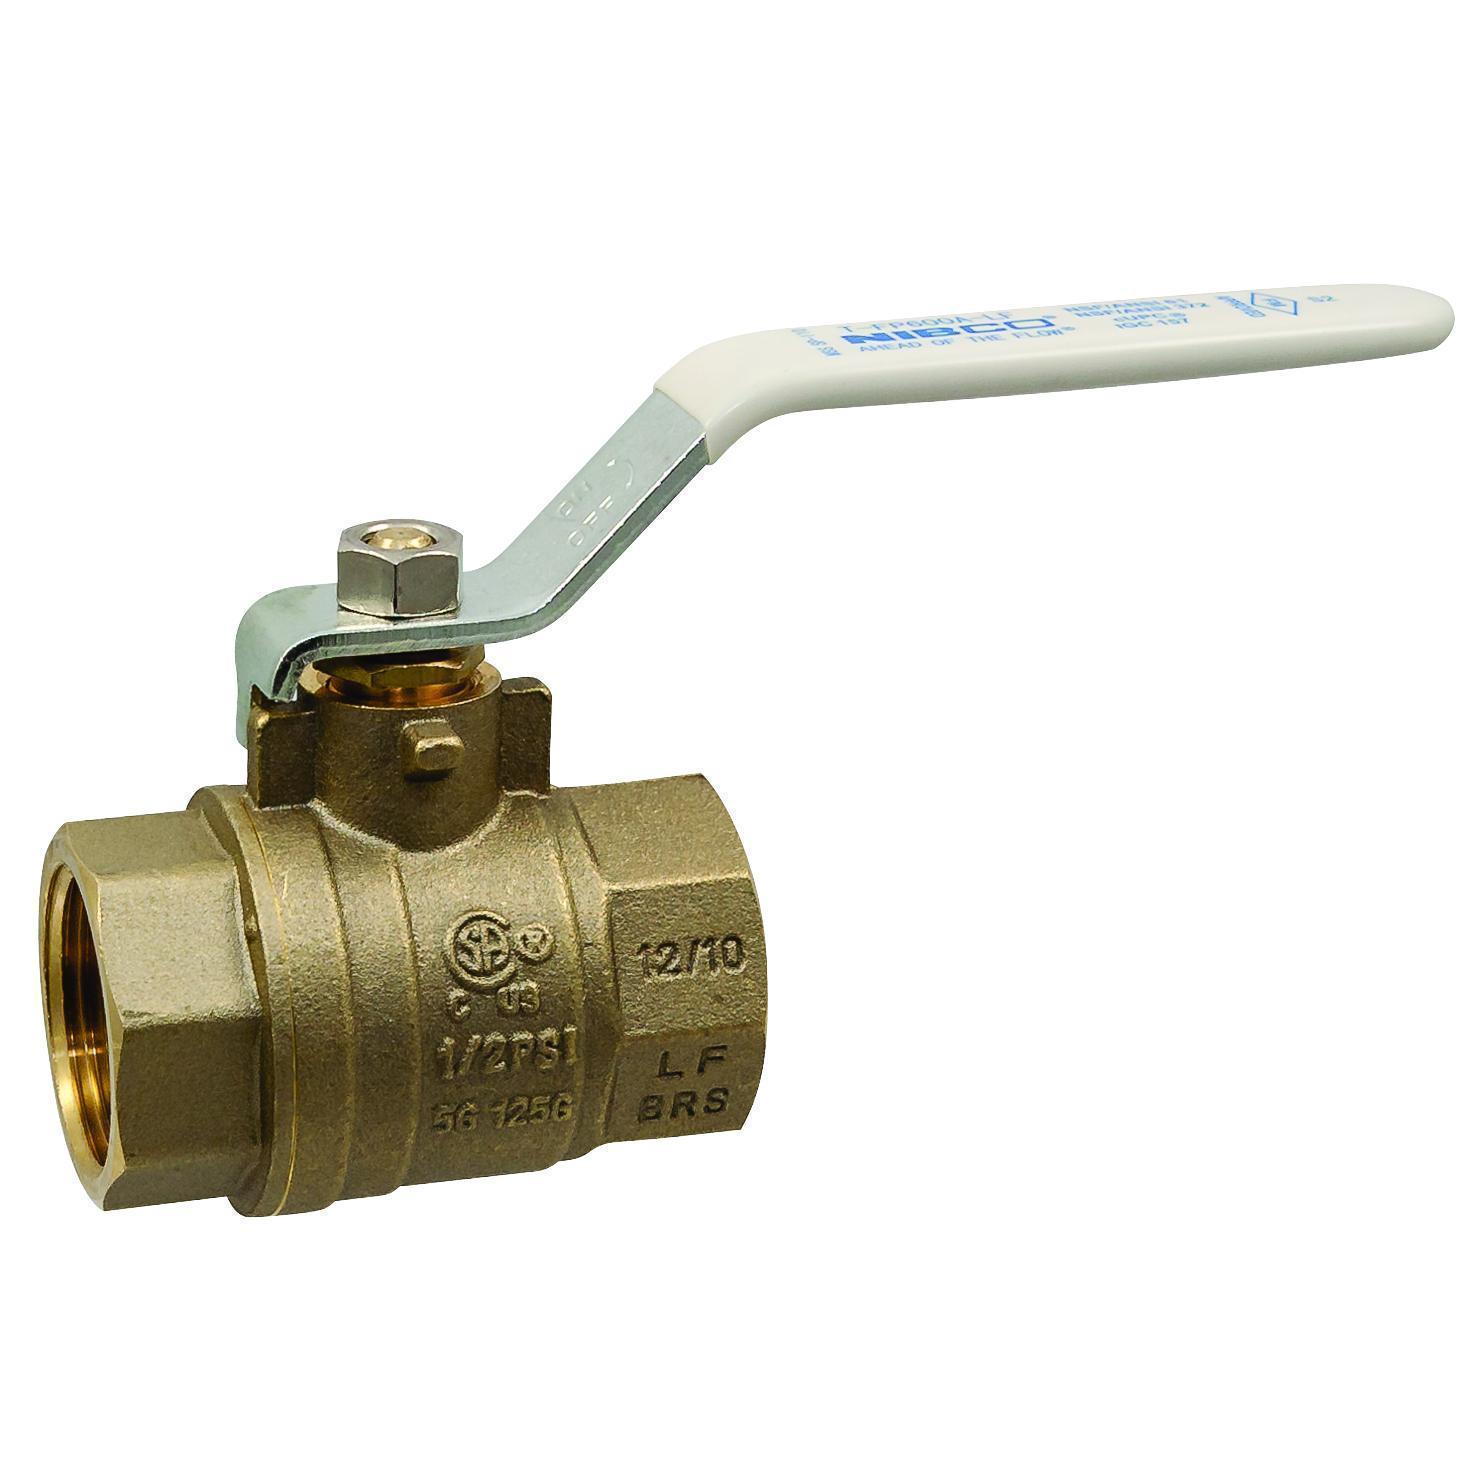 NIBCO® NL998X6 T-FP-600A-LF 2-Piece Ball Valve, 1/2 in Nominal, FNPT End Style, Brass Body, Full Port, PTFE Softgoods, Import